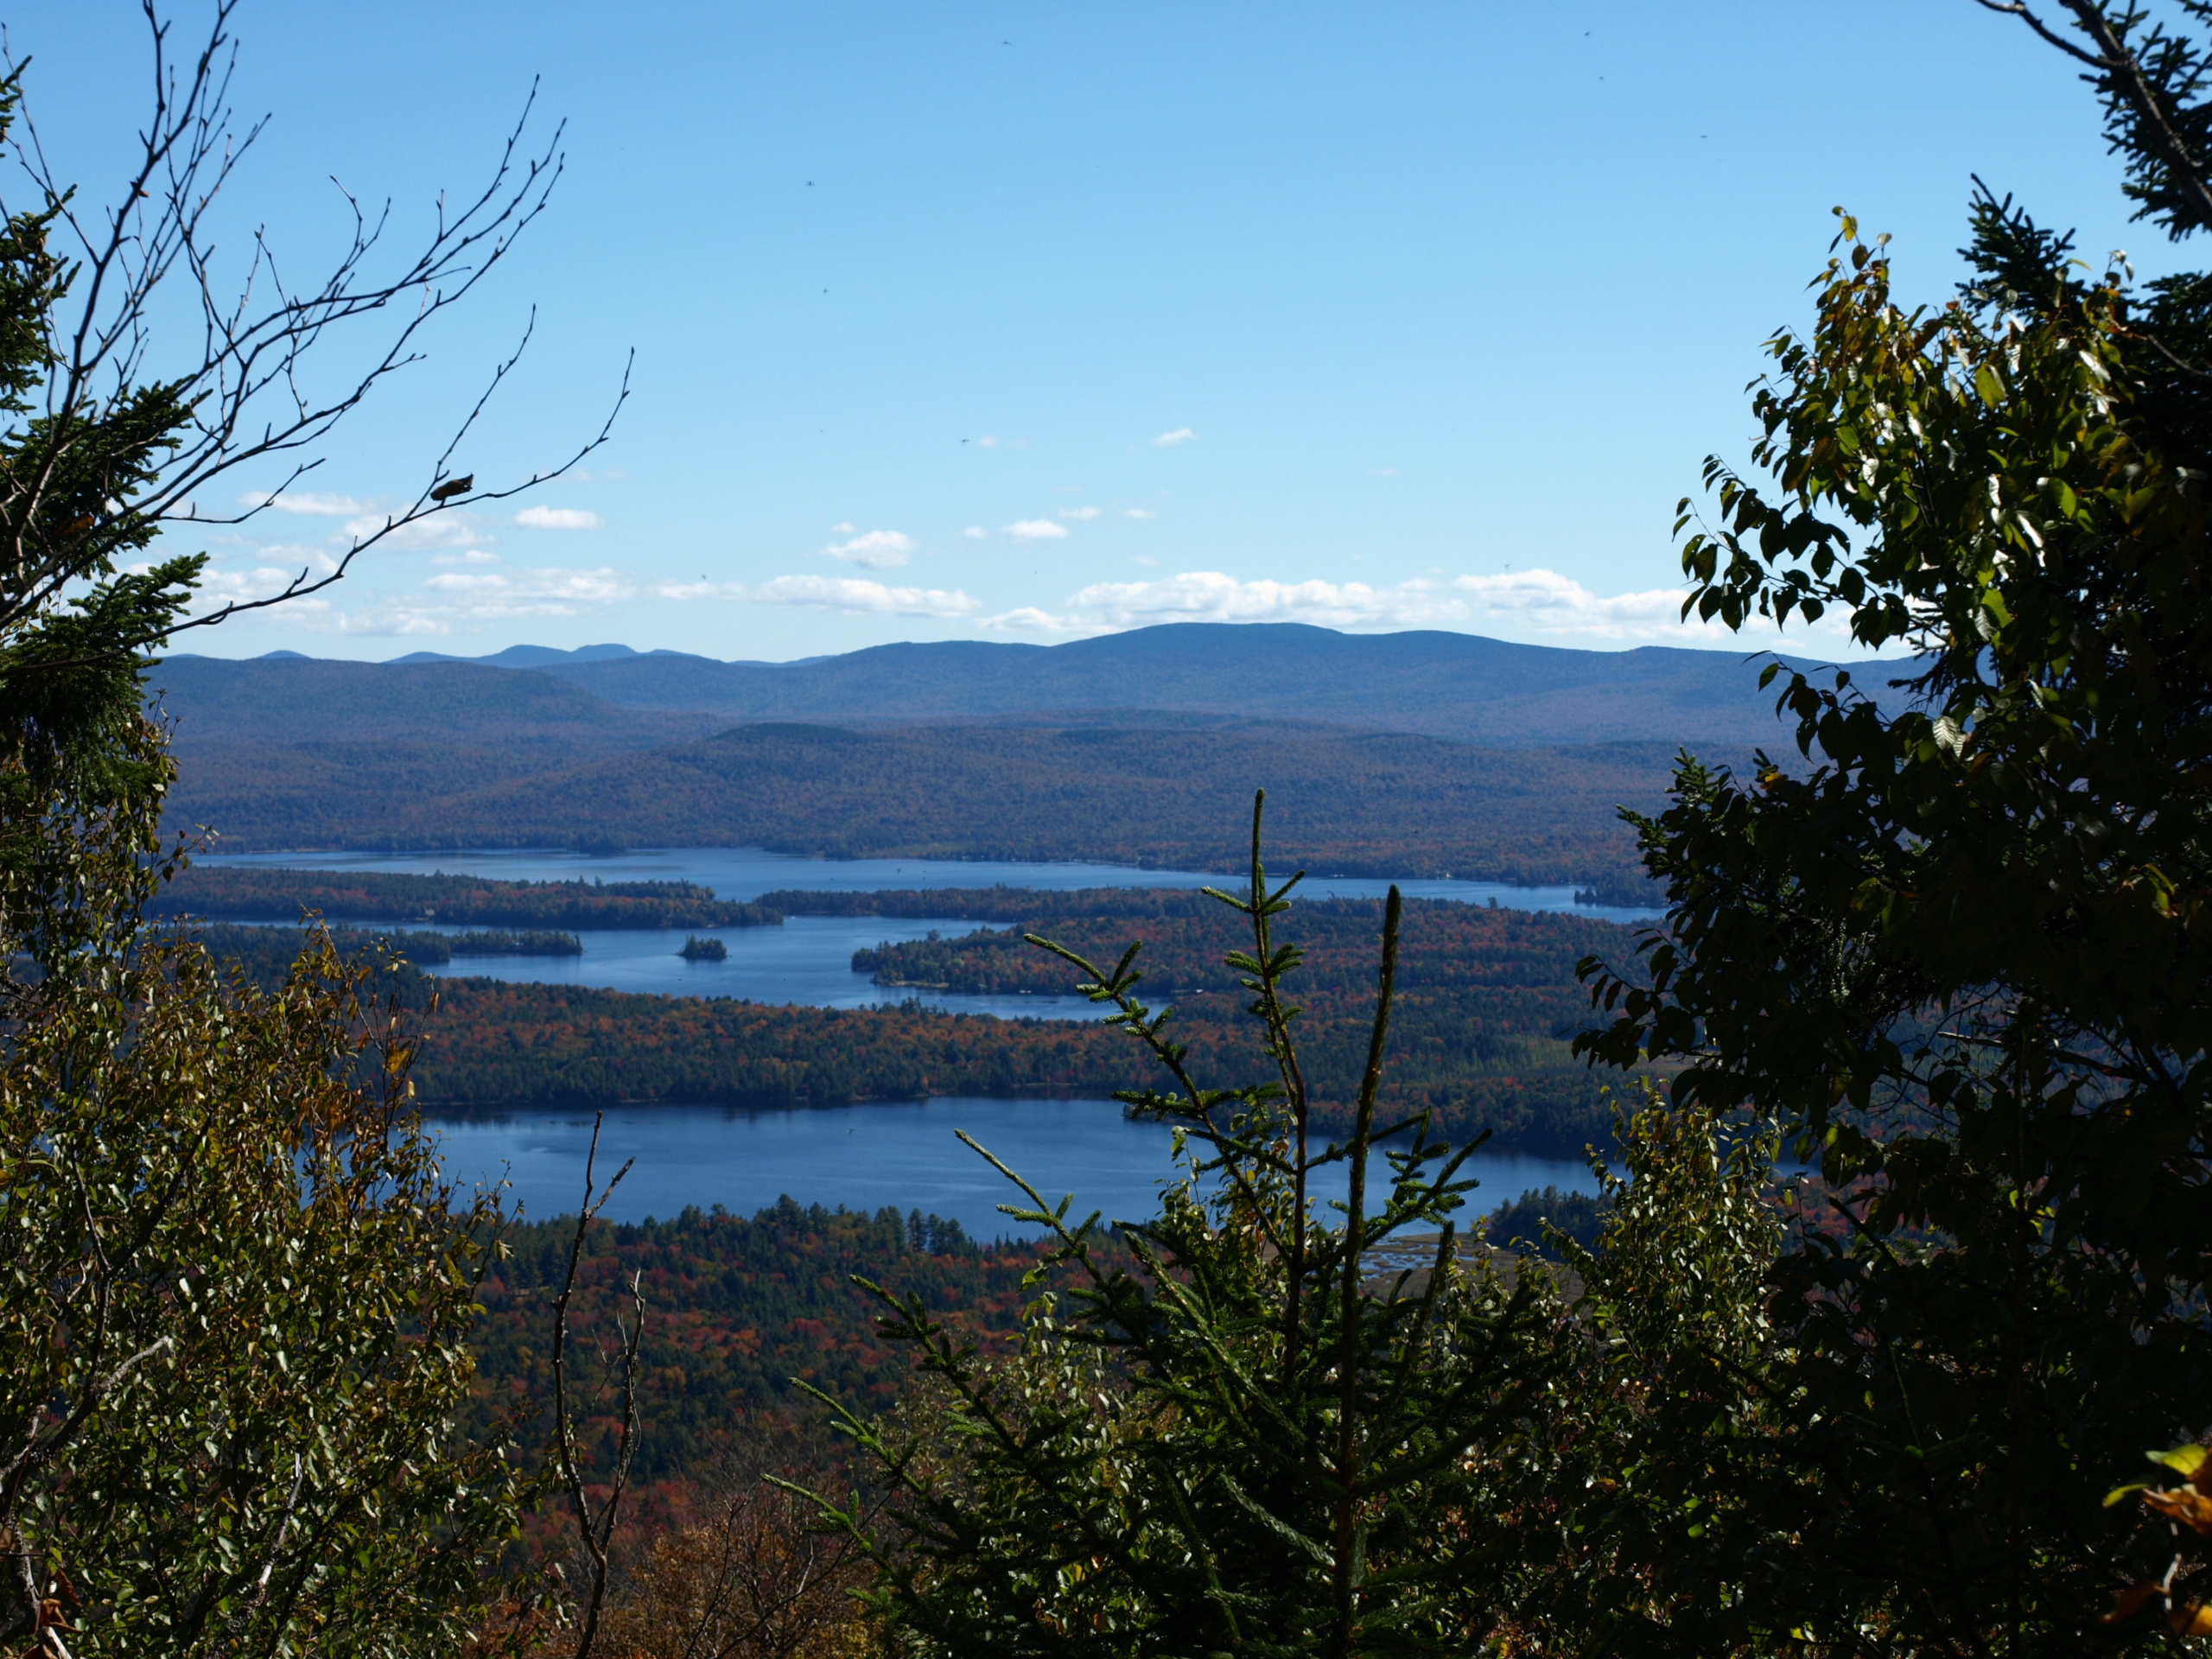 View from atop West Mountain in Raquette Lake